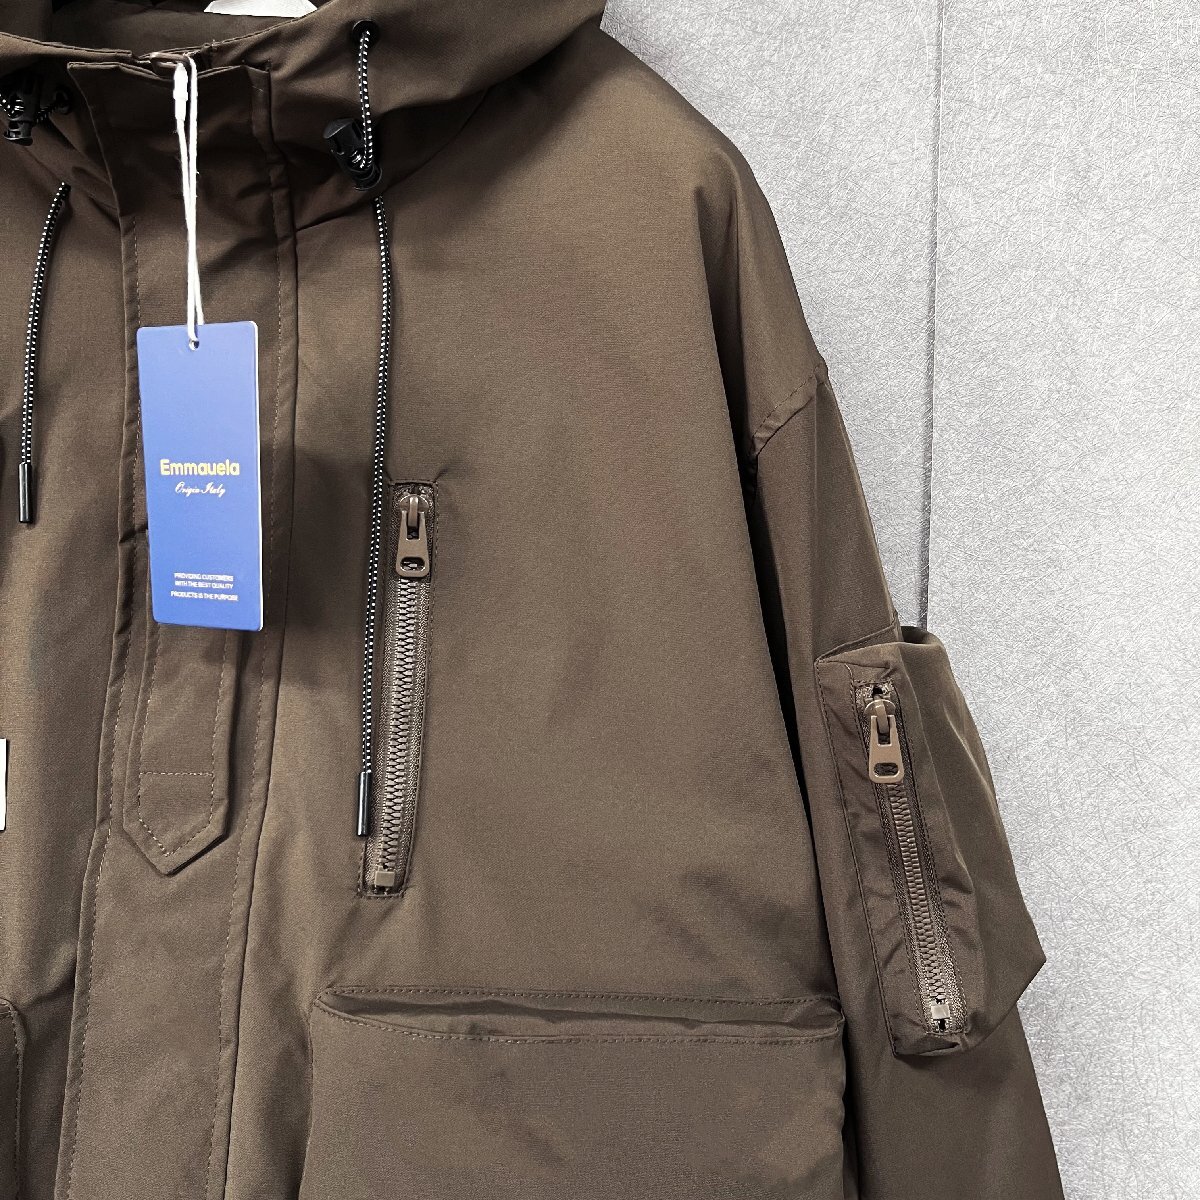  standard * mountain parka regular price 6 ten thousand *Emmauela* Italy * milano departure * high class functionality speed . plain protection against cold . manner outdoor outer men's M/46